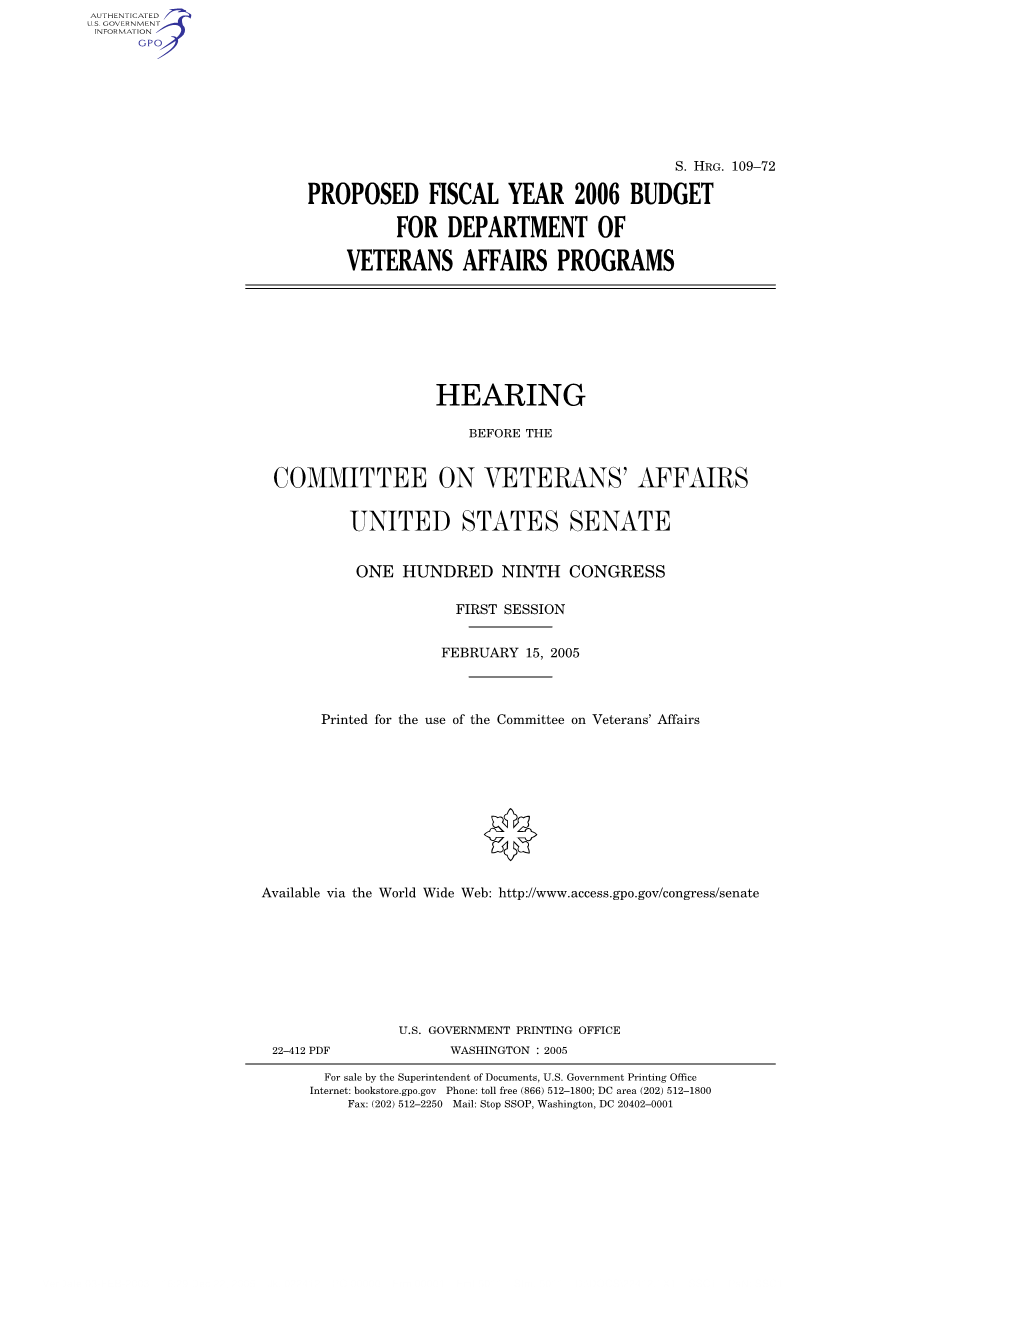 Proposed Fiscal Year 2006 Budget for Department of Veterans Affairs Programs